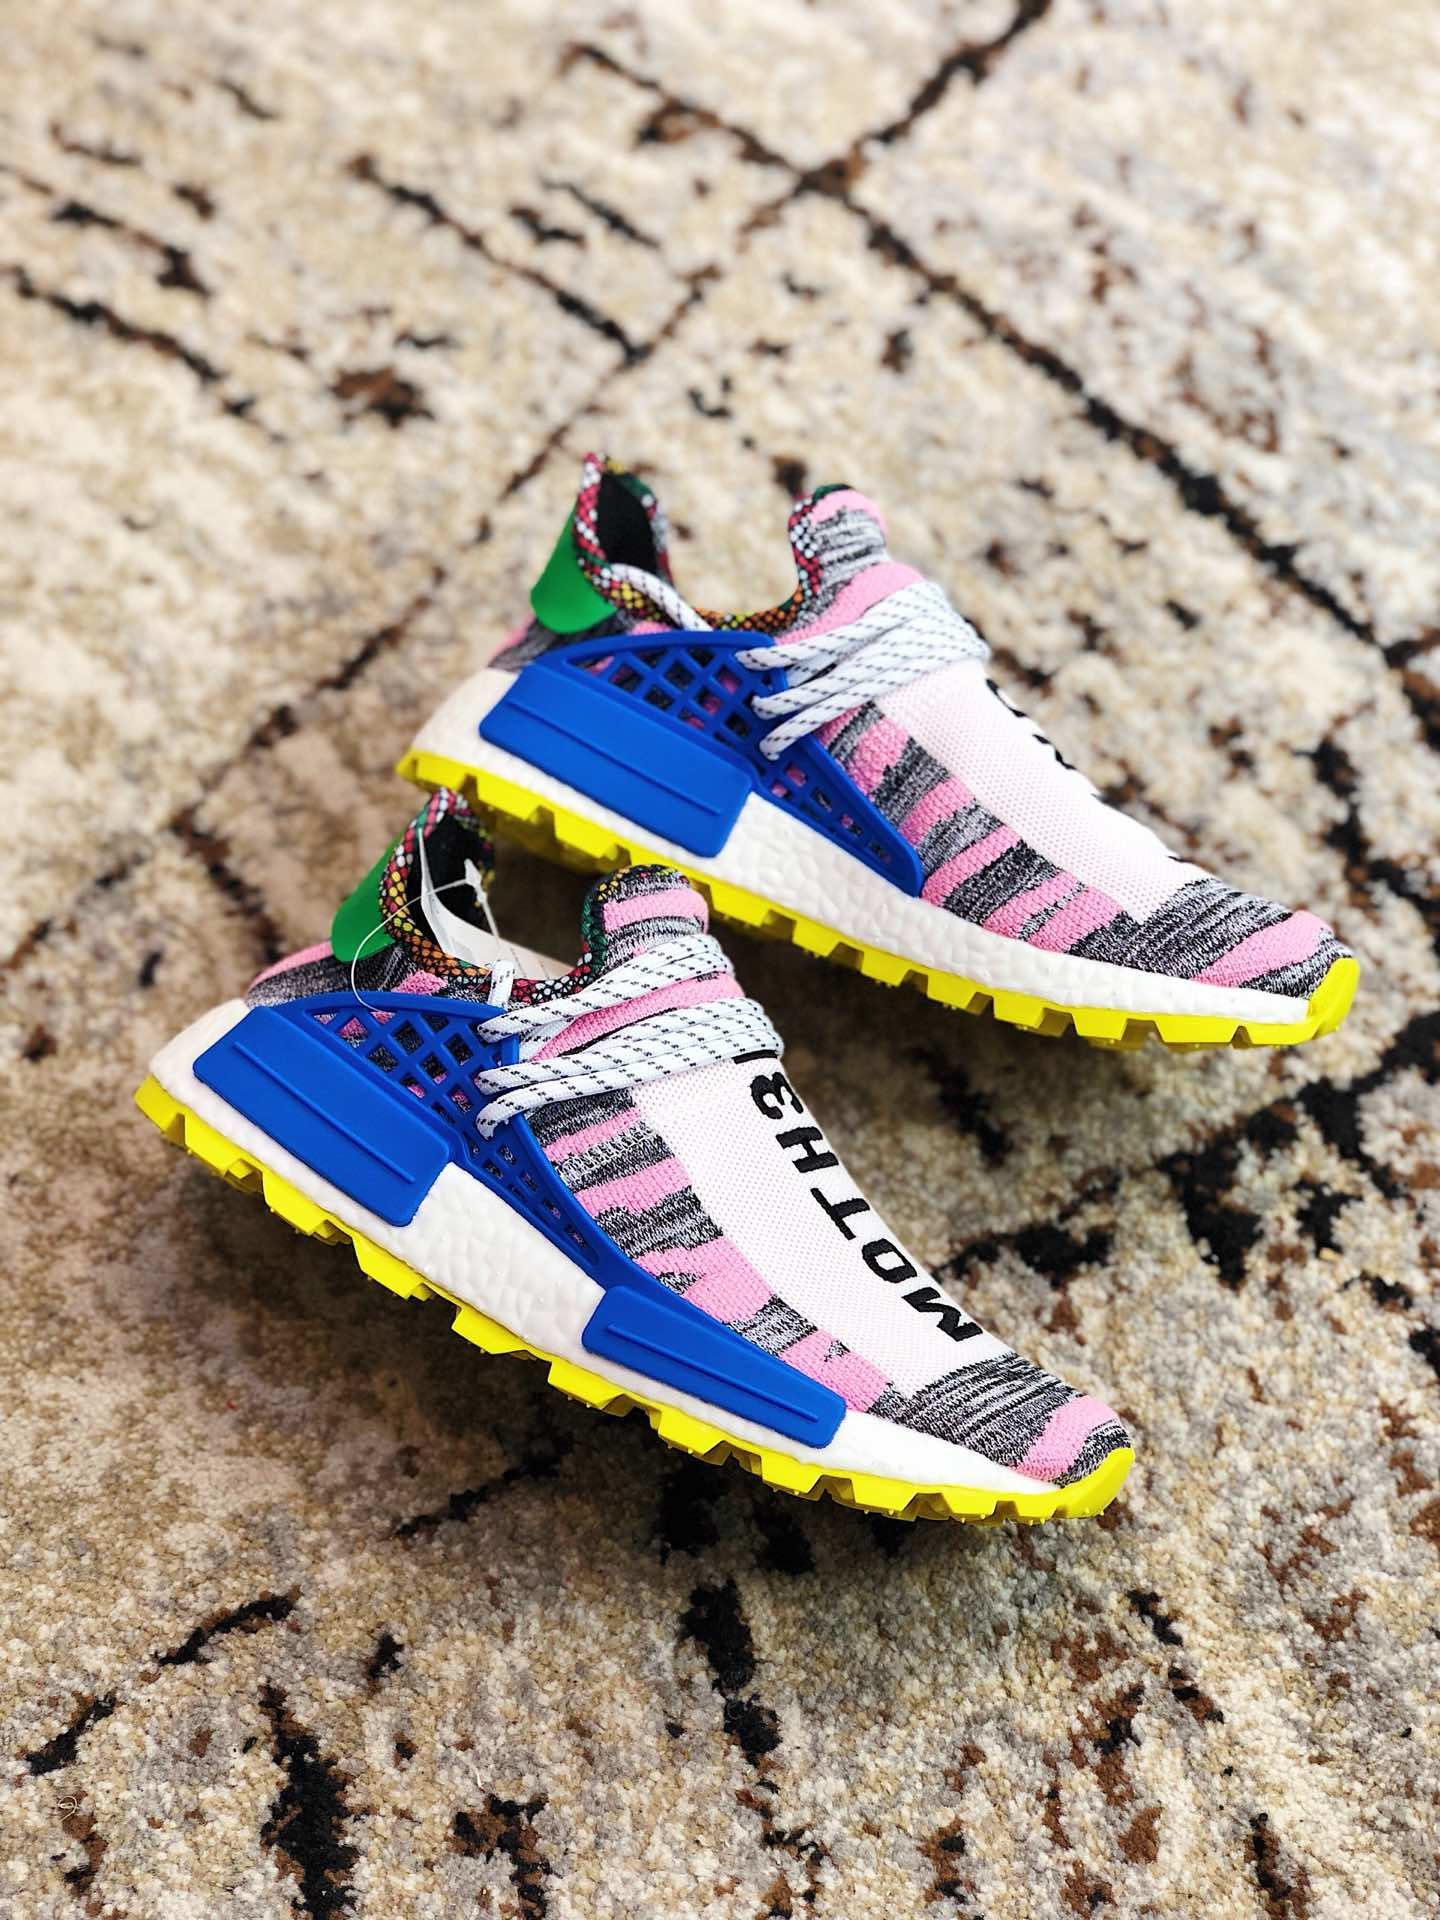 High Quality Retail version Pharrell x Adidas NMD Hu “Solar Pack” Hi-Res Red/Bright Blue BB9531 with fish scale ready